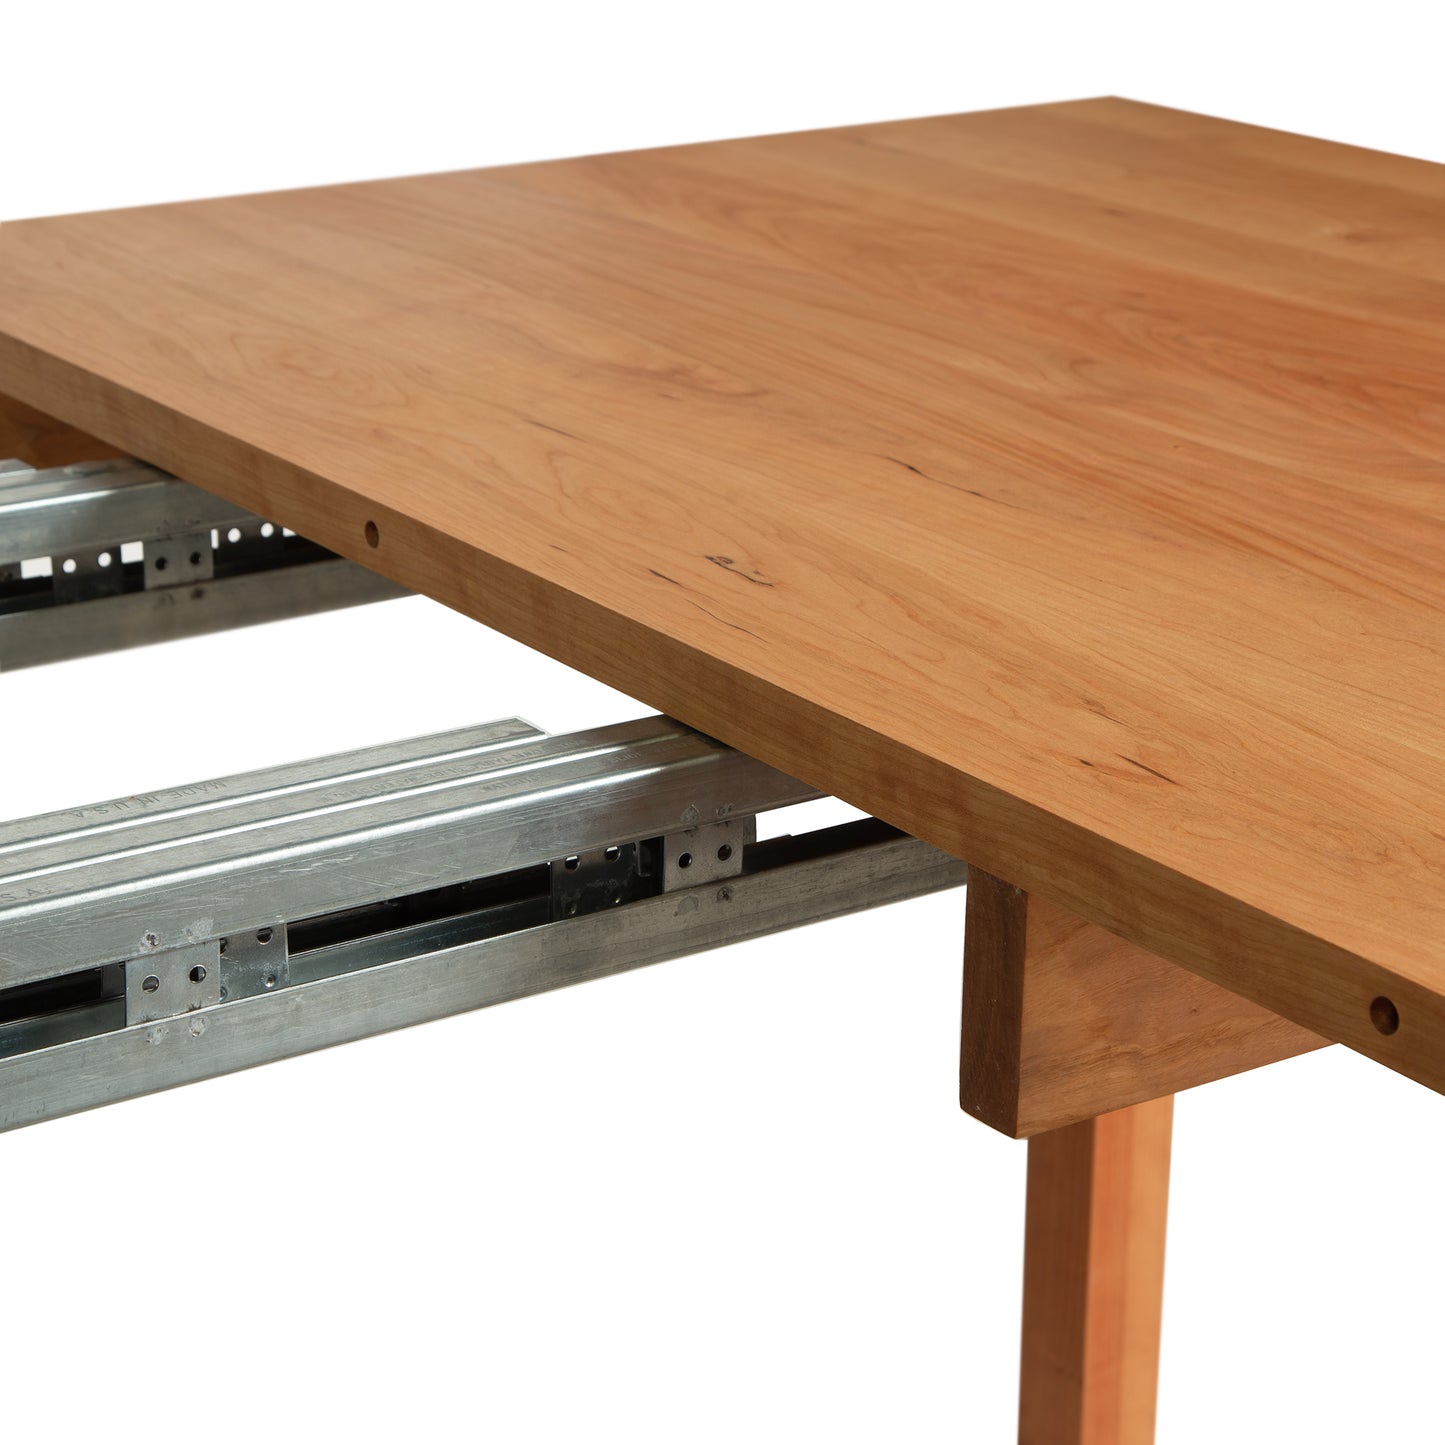 A close-up photo of an open, extendable Vermont Furniture Designs Burlington Shaker Extension Dining Table - Floor Model showing the metal sliding mechanism beneath the tabletop. The table is made of natural cherry wood and has four legs.